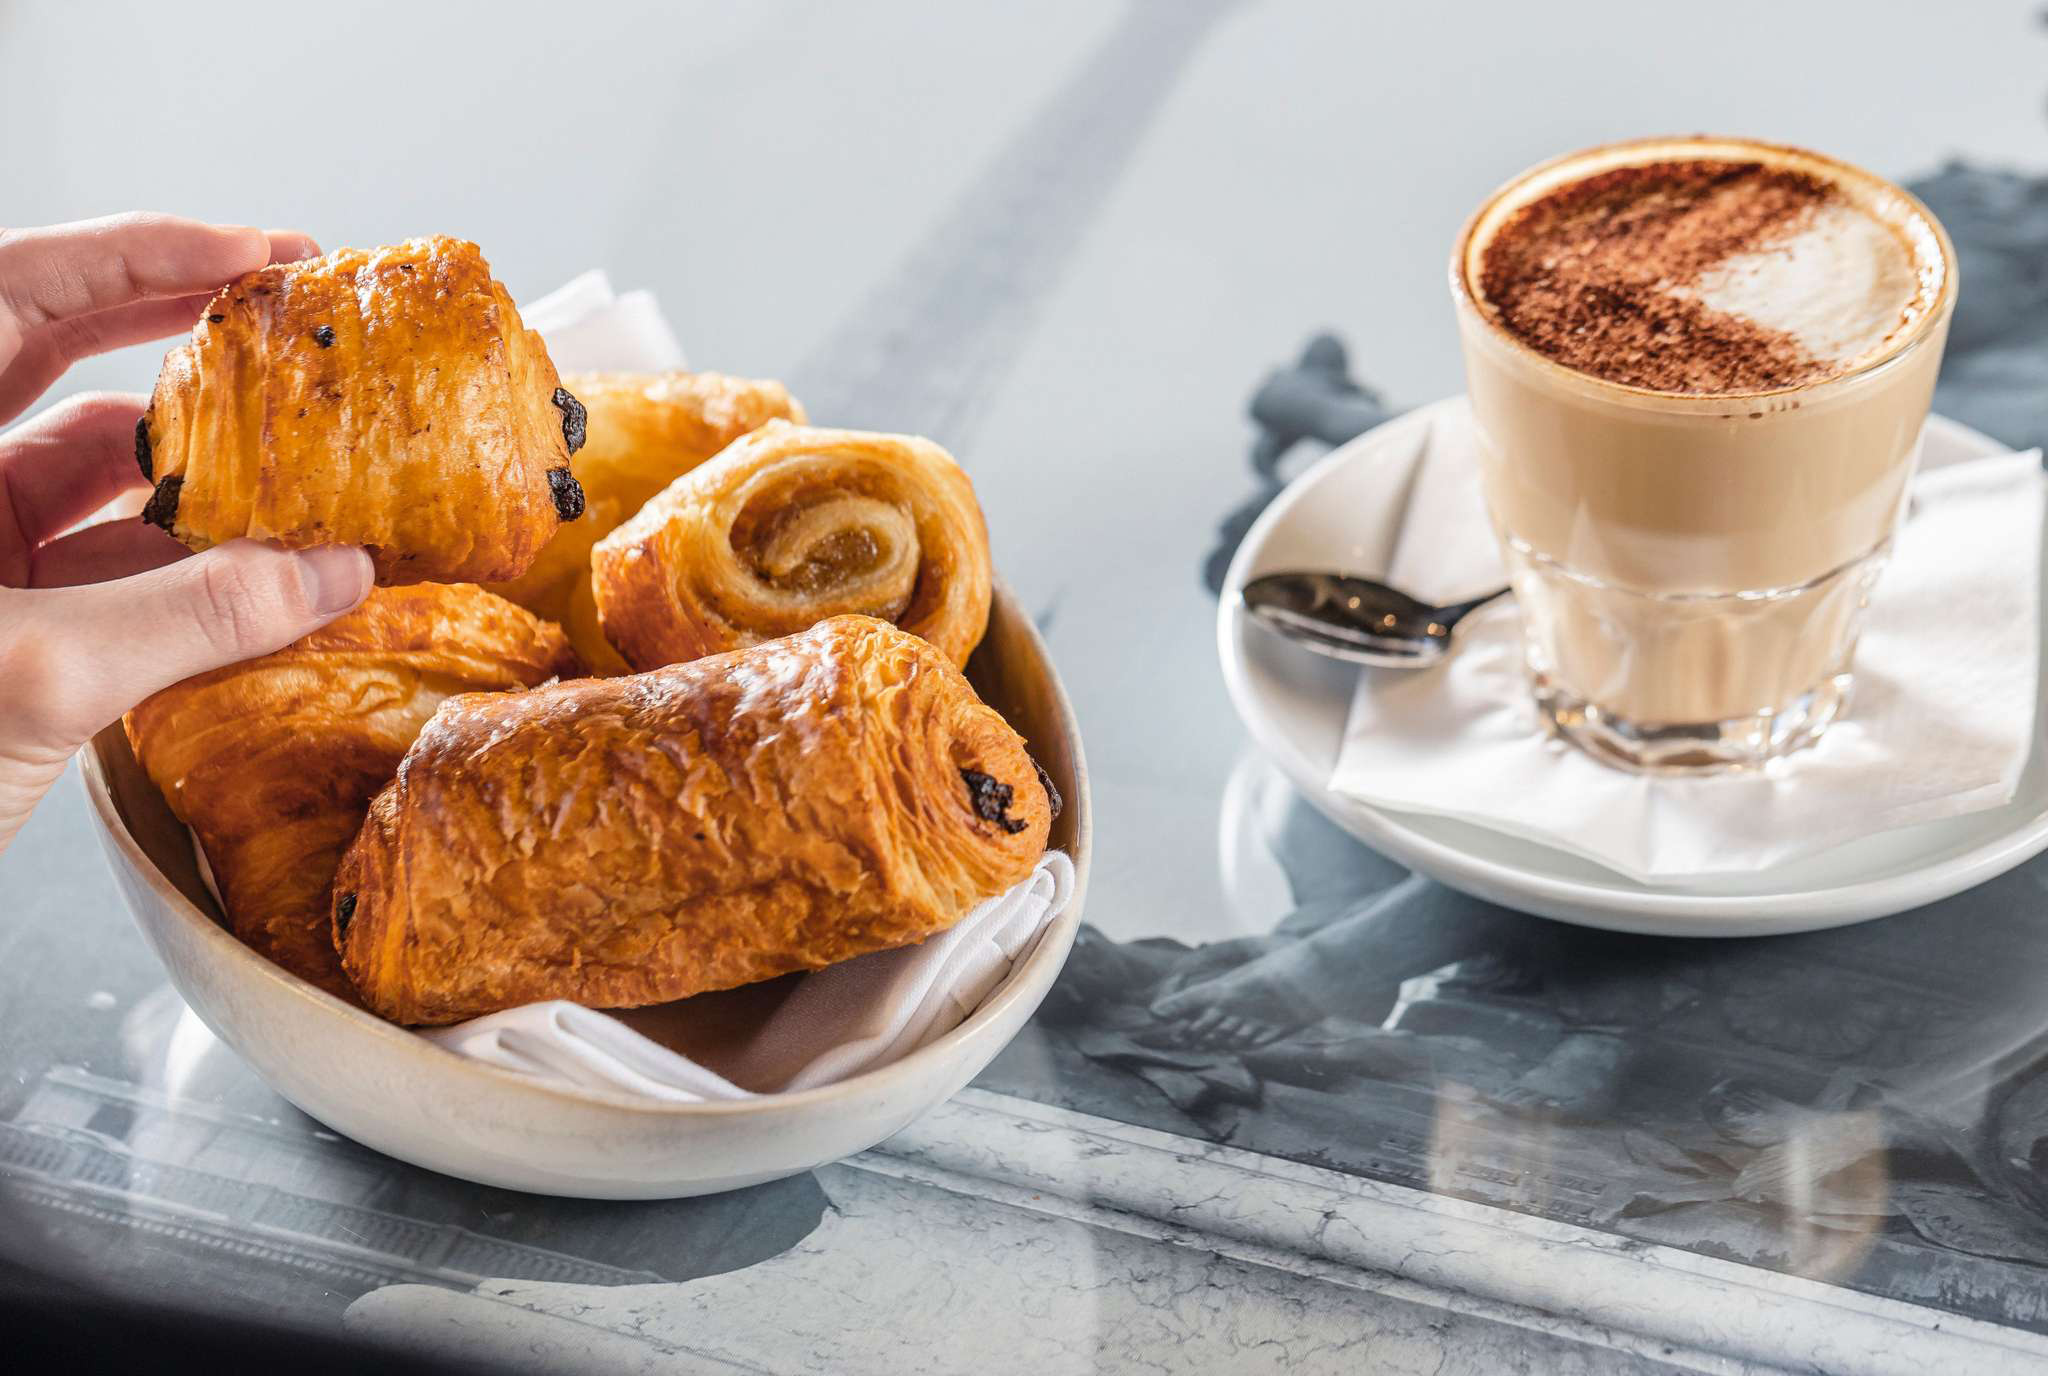 Pastries and coffee at Sofitel Brisbane Central